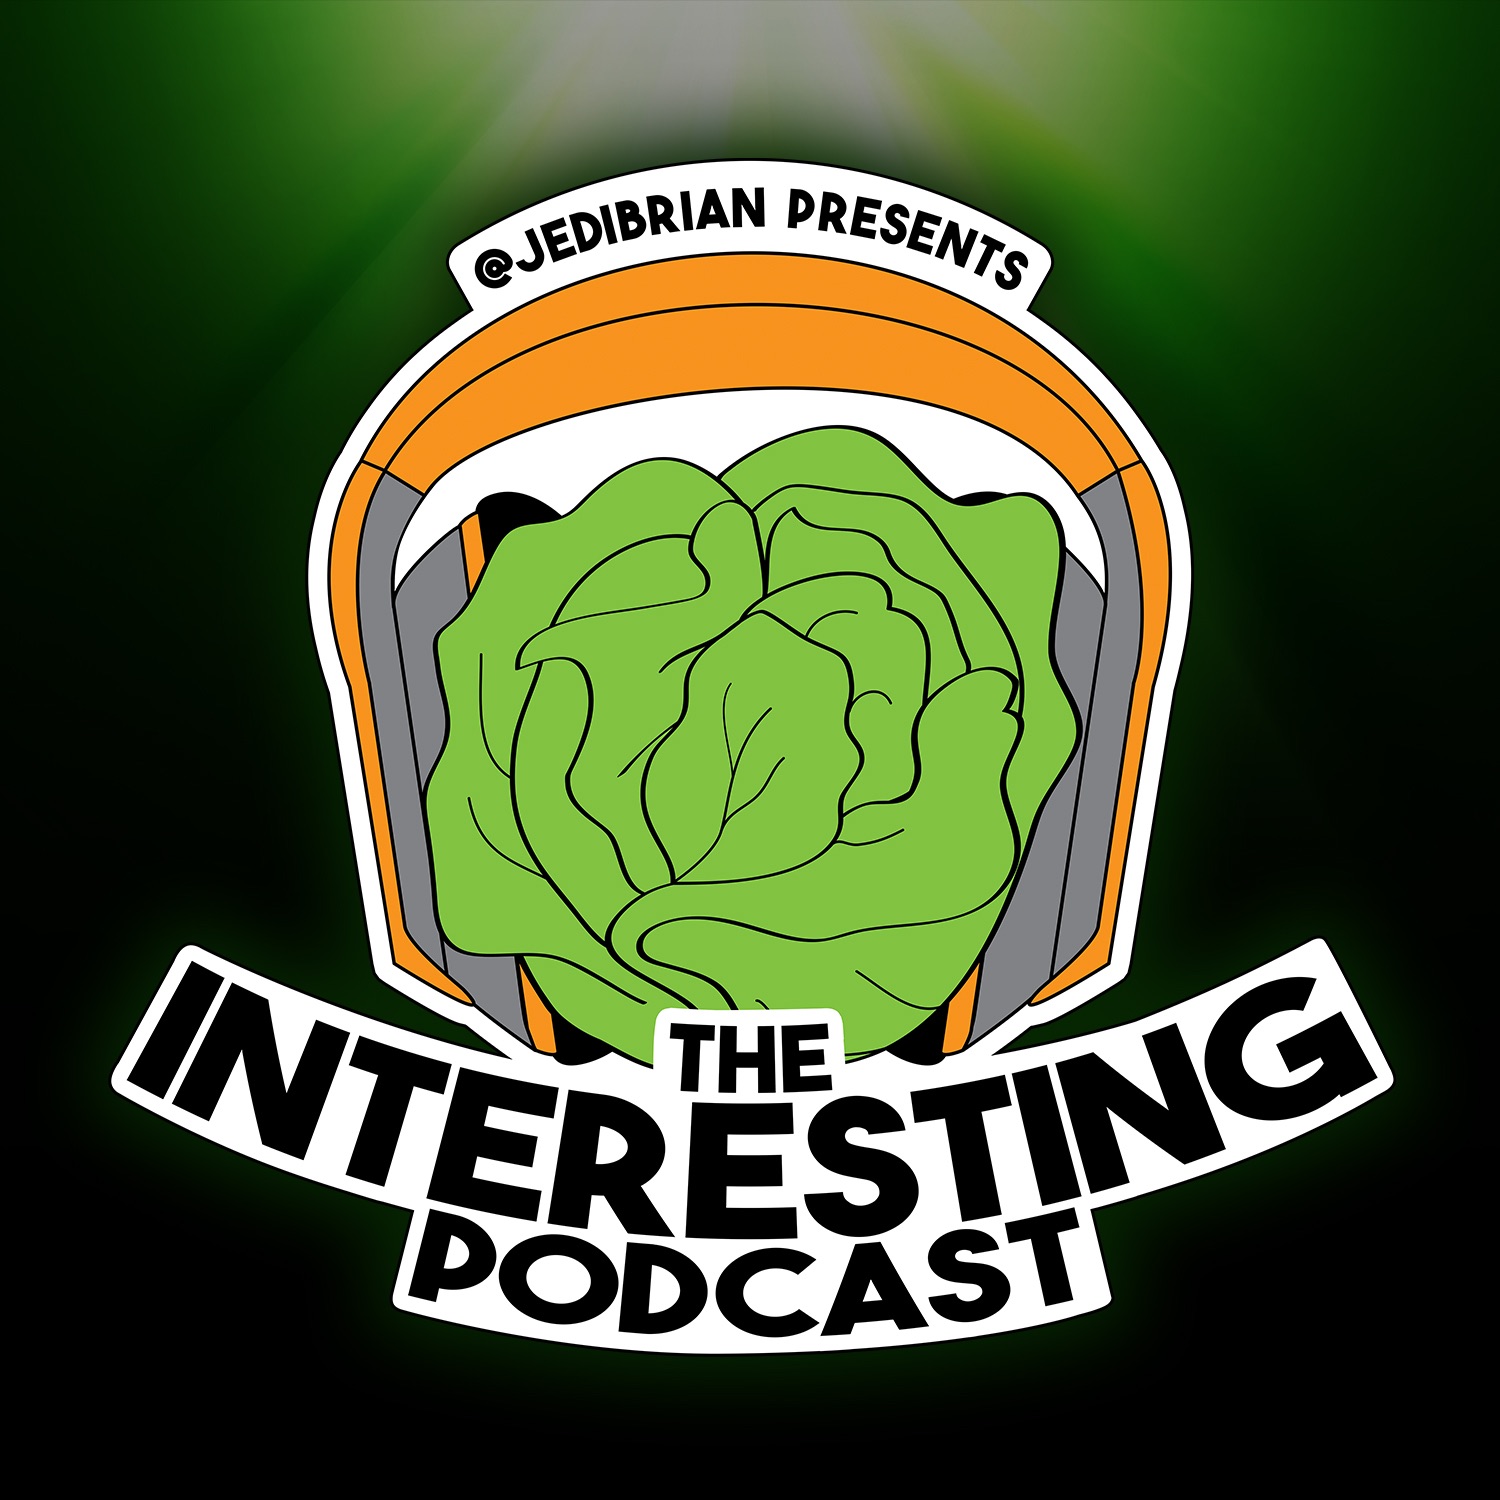 The Interesting Podcast (with Brian Ballance) podcast show image